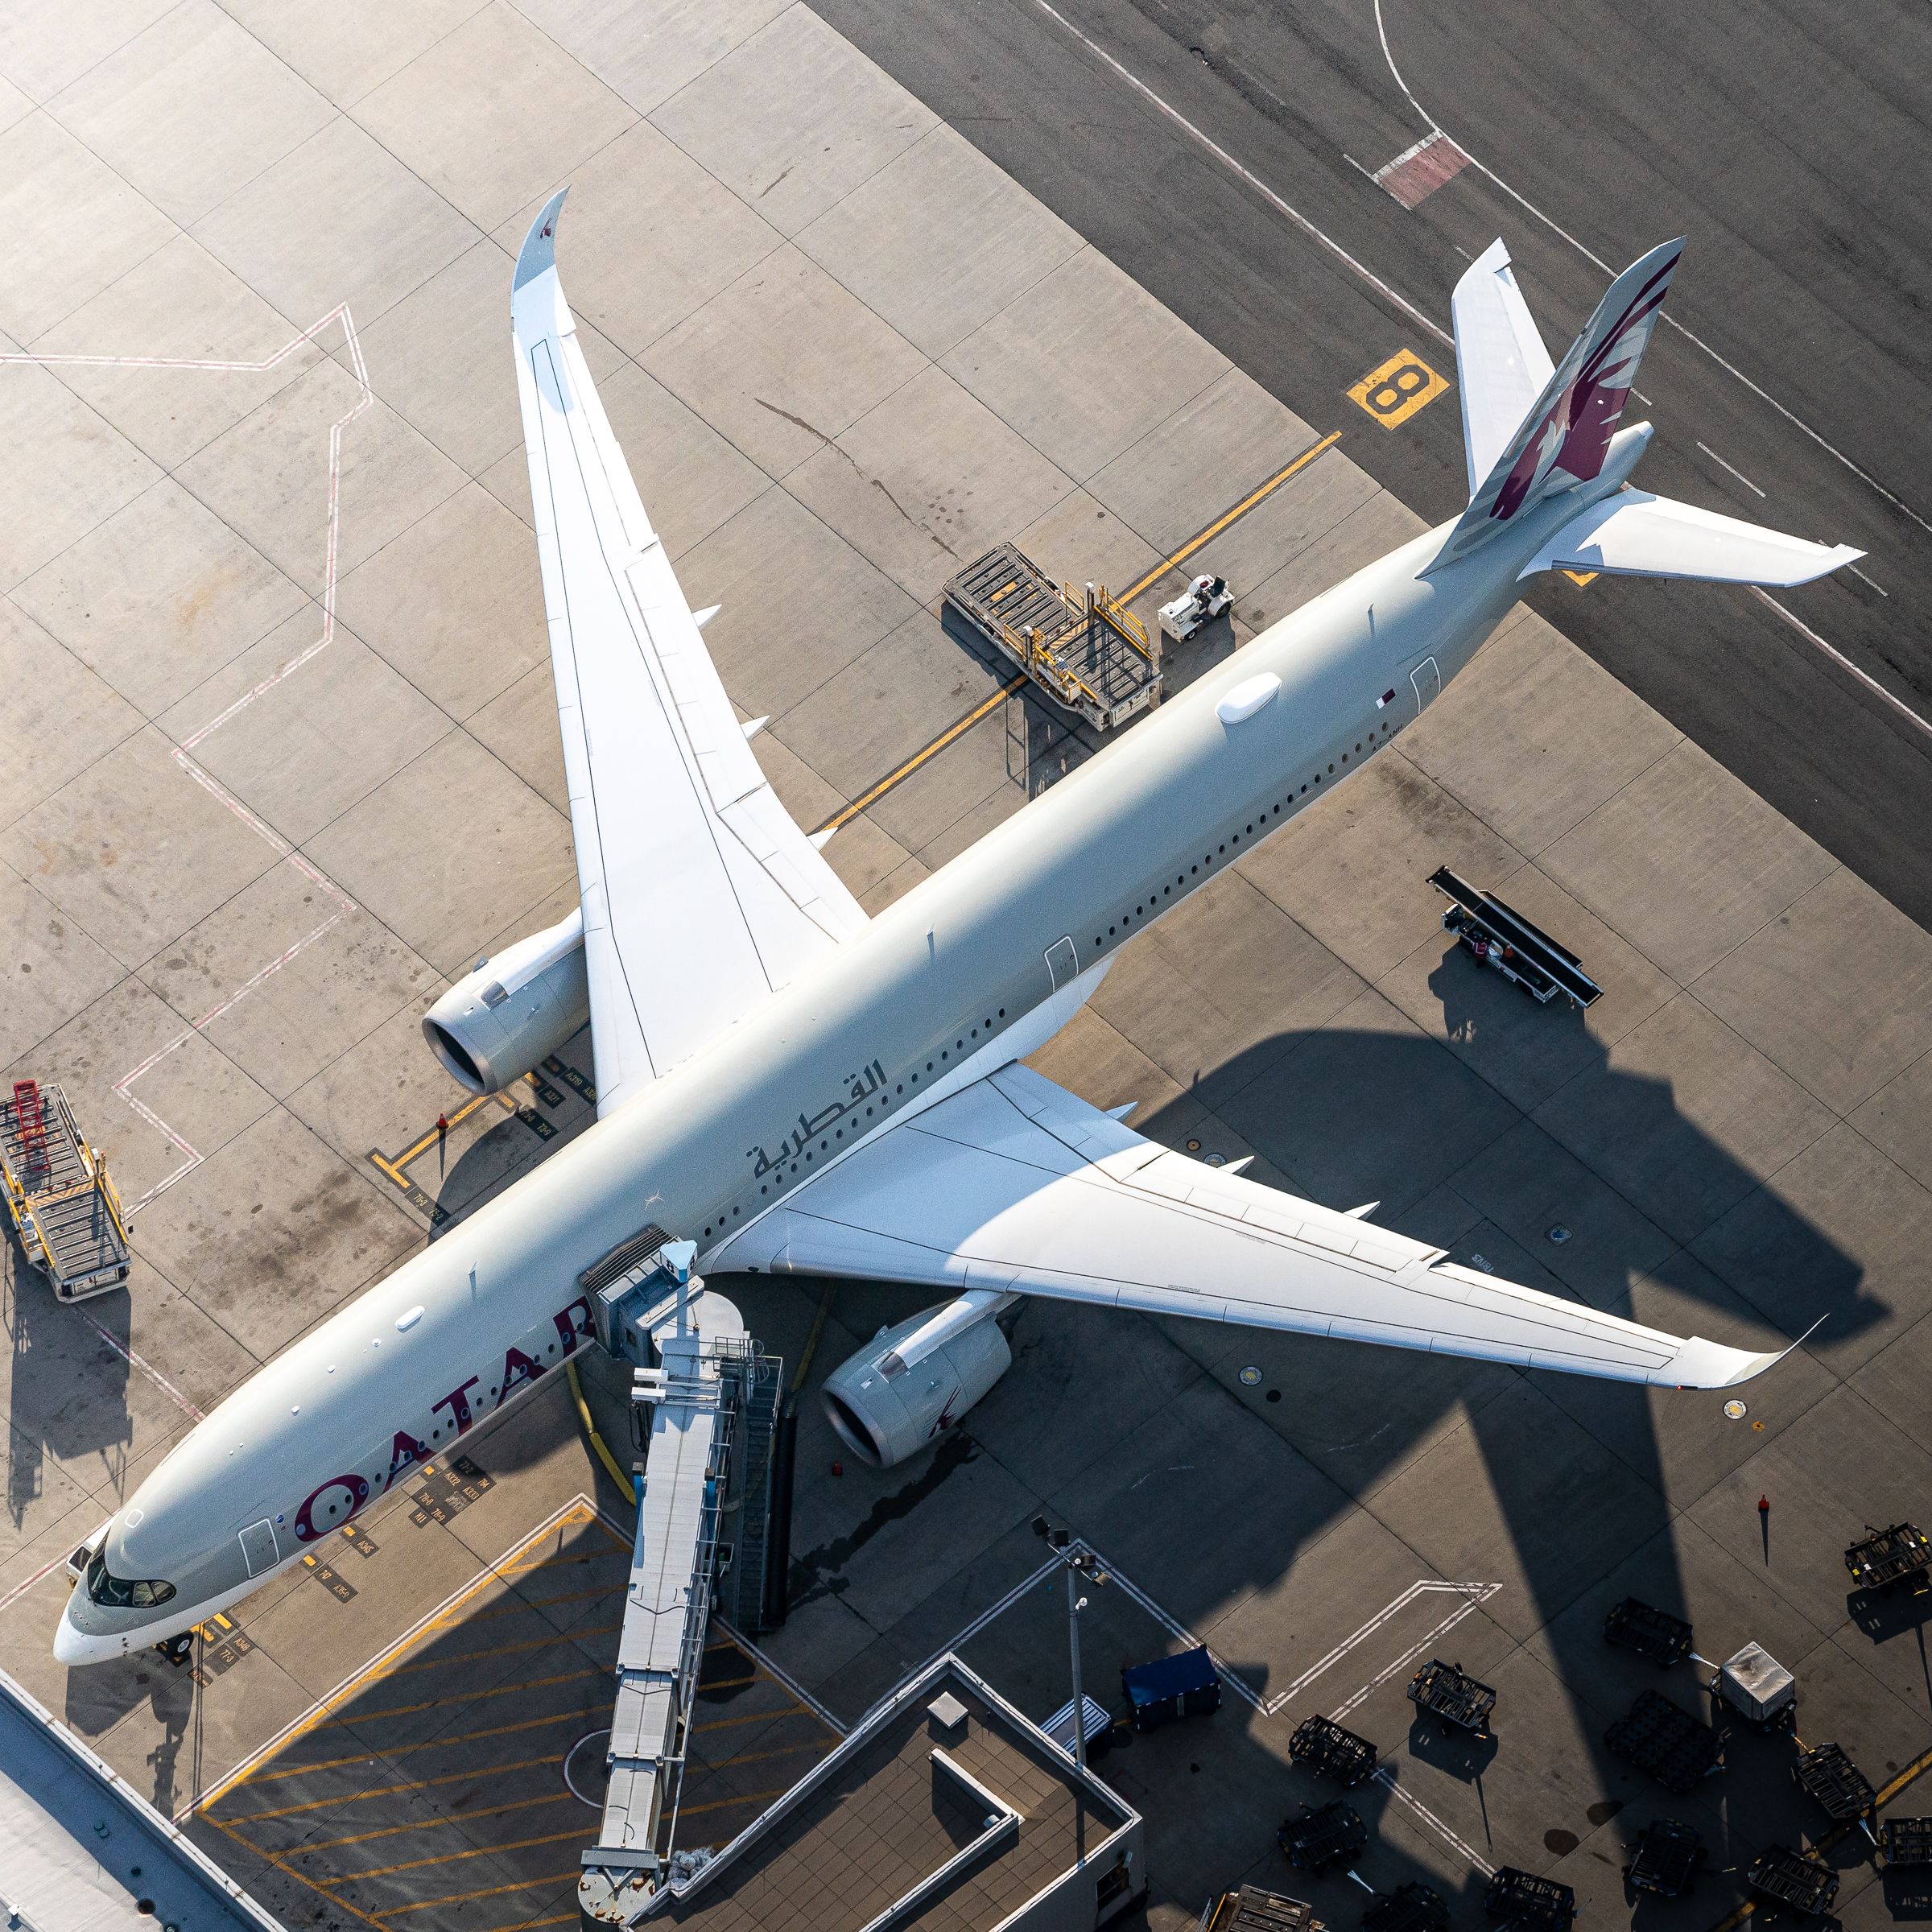 A Qatar Airways Airbus A350-1041 on an airport apron parked at a gate.